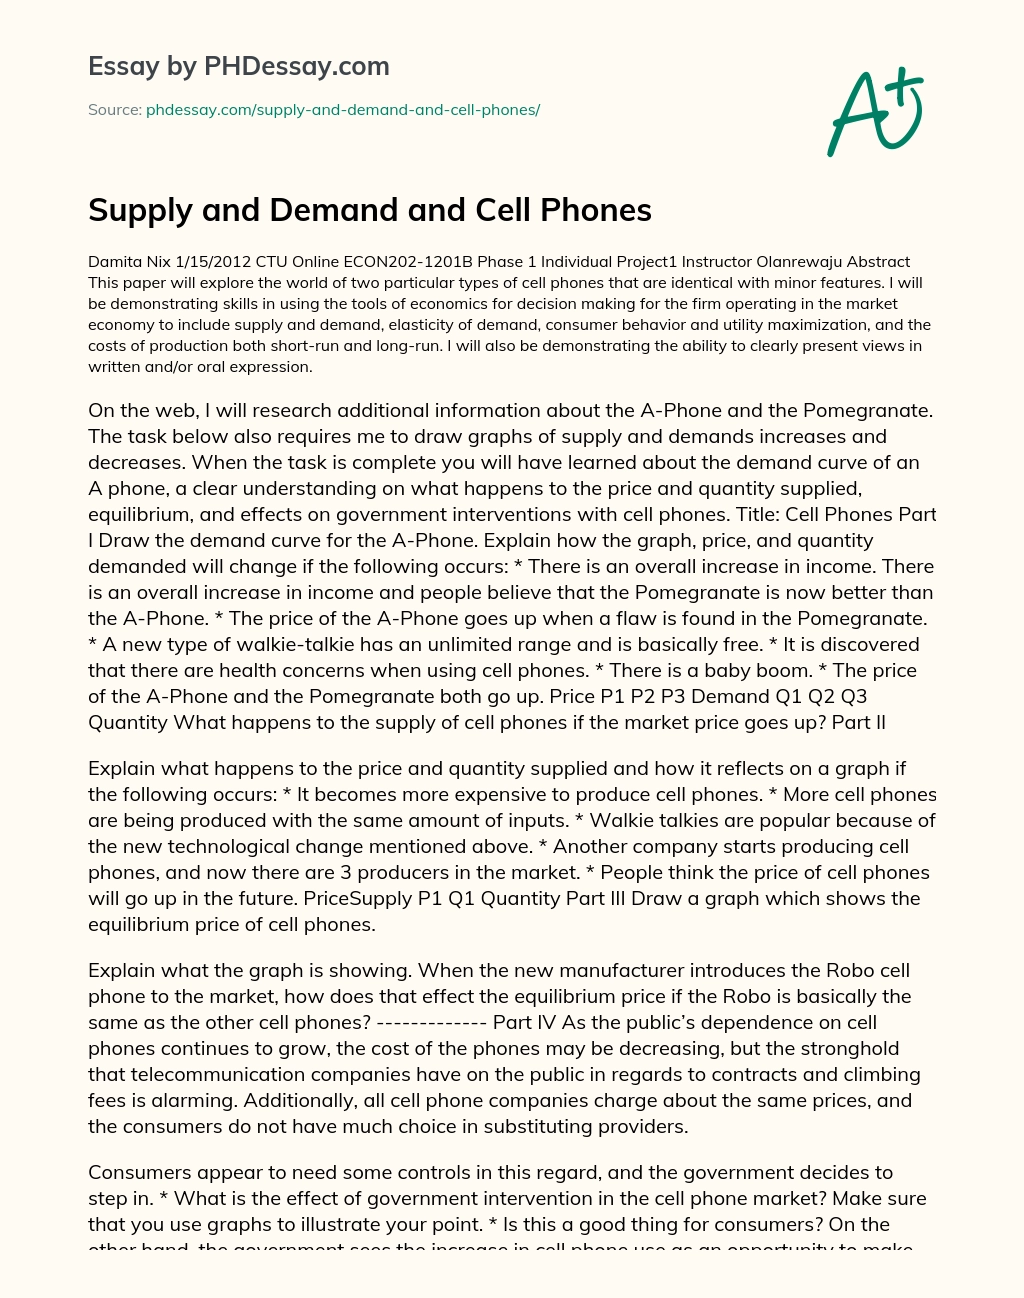 Supply and Demand and Cell Phones essay